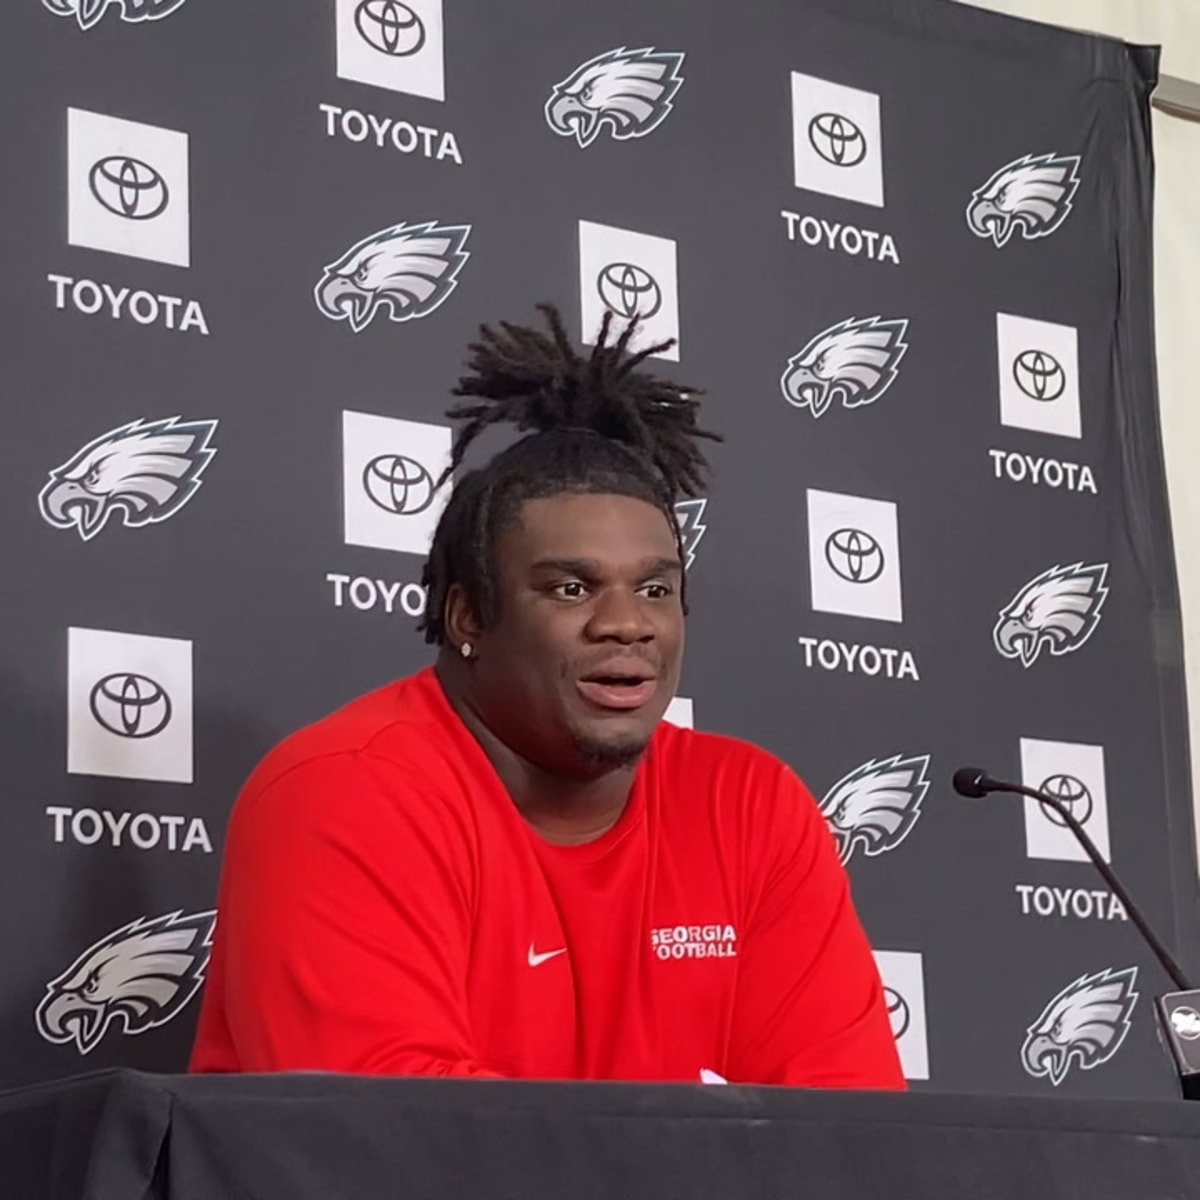 Jordan Davis has lost weight since starting practice with Eagles - NBC  Sports